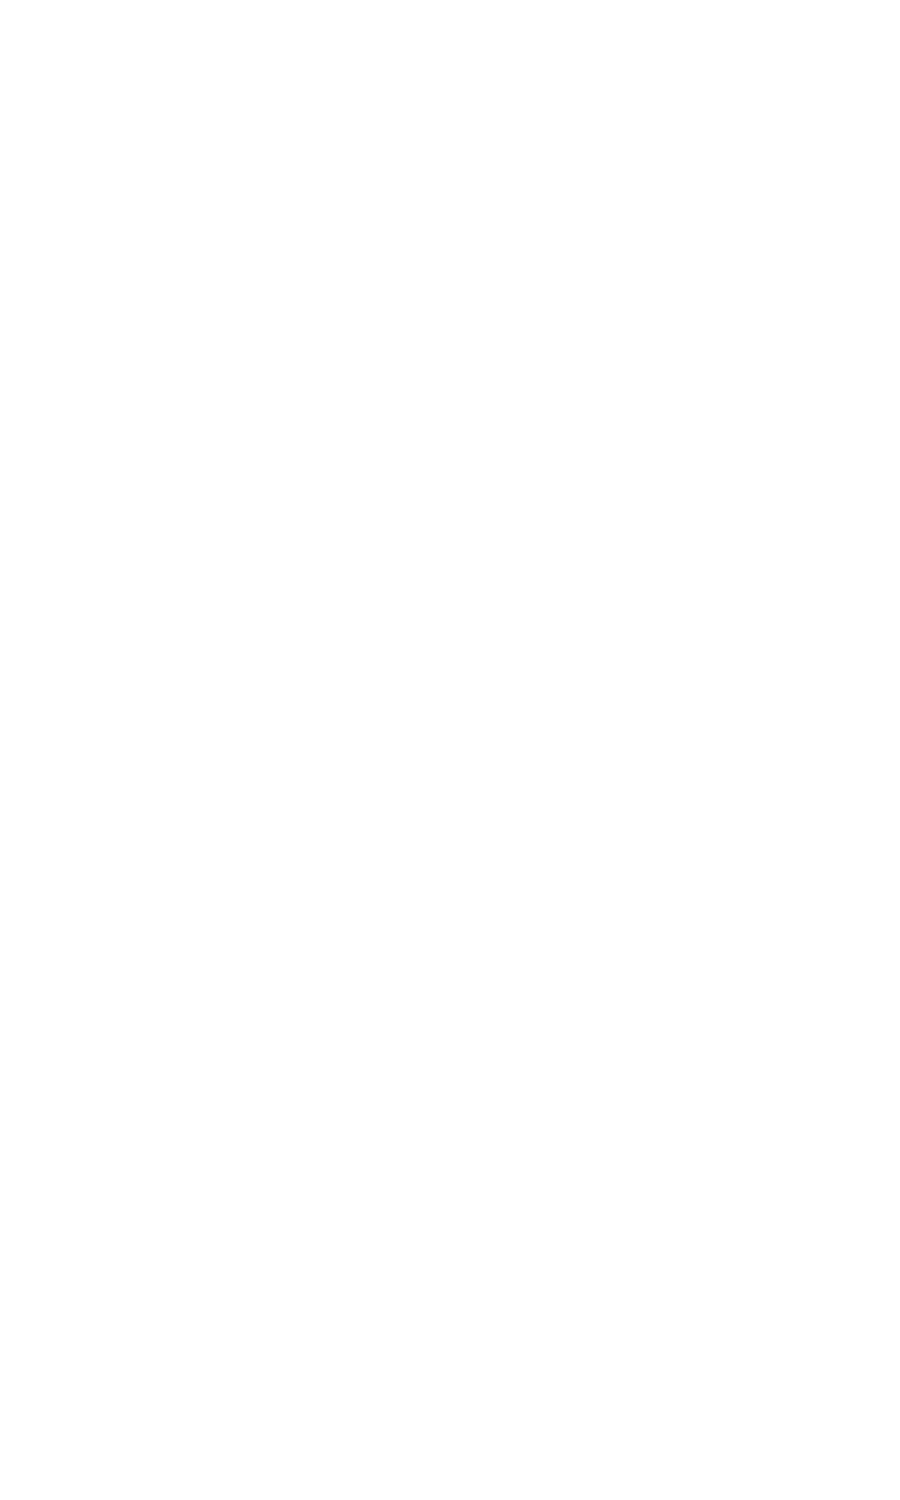 Able Building Group